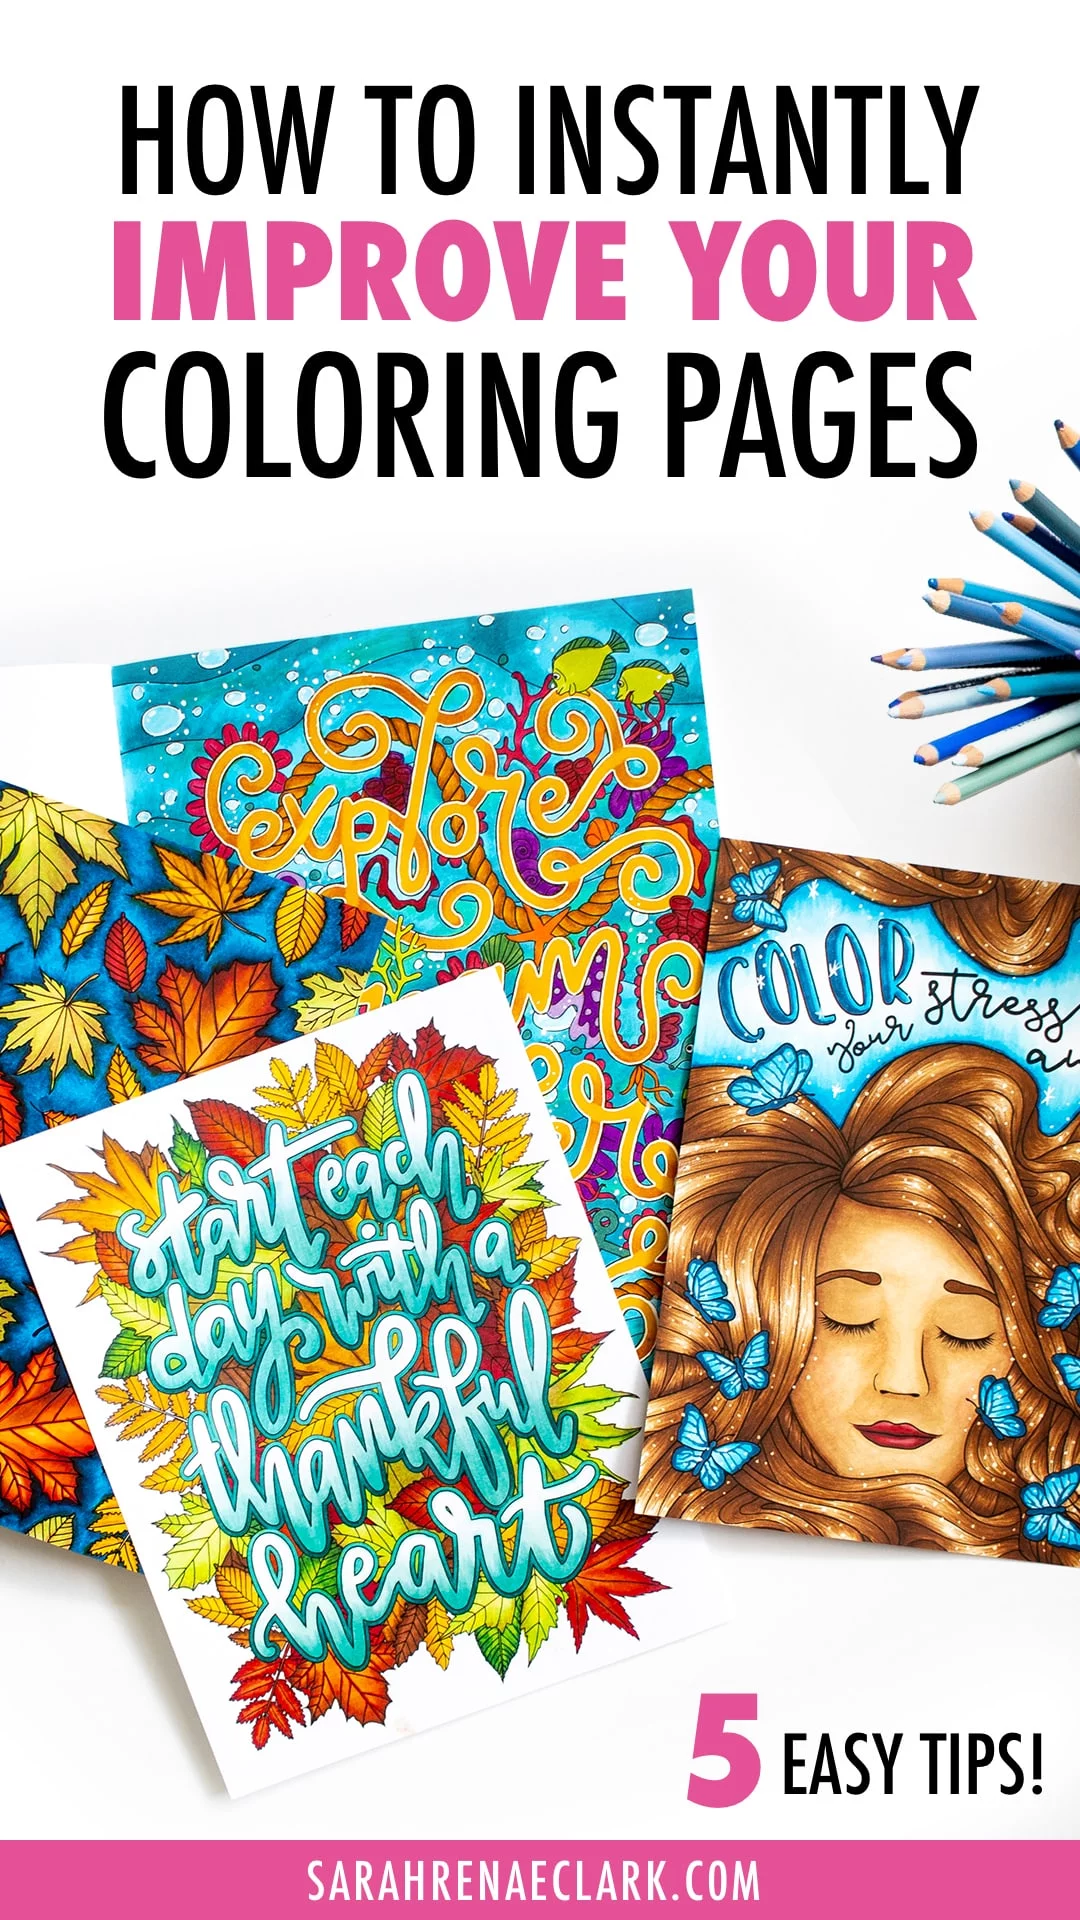 10 Tips For Creative Haven Color-by-Number Books 